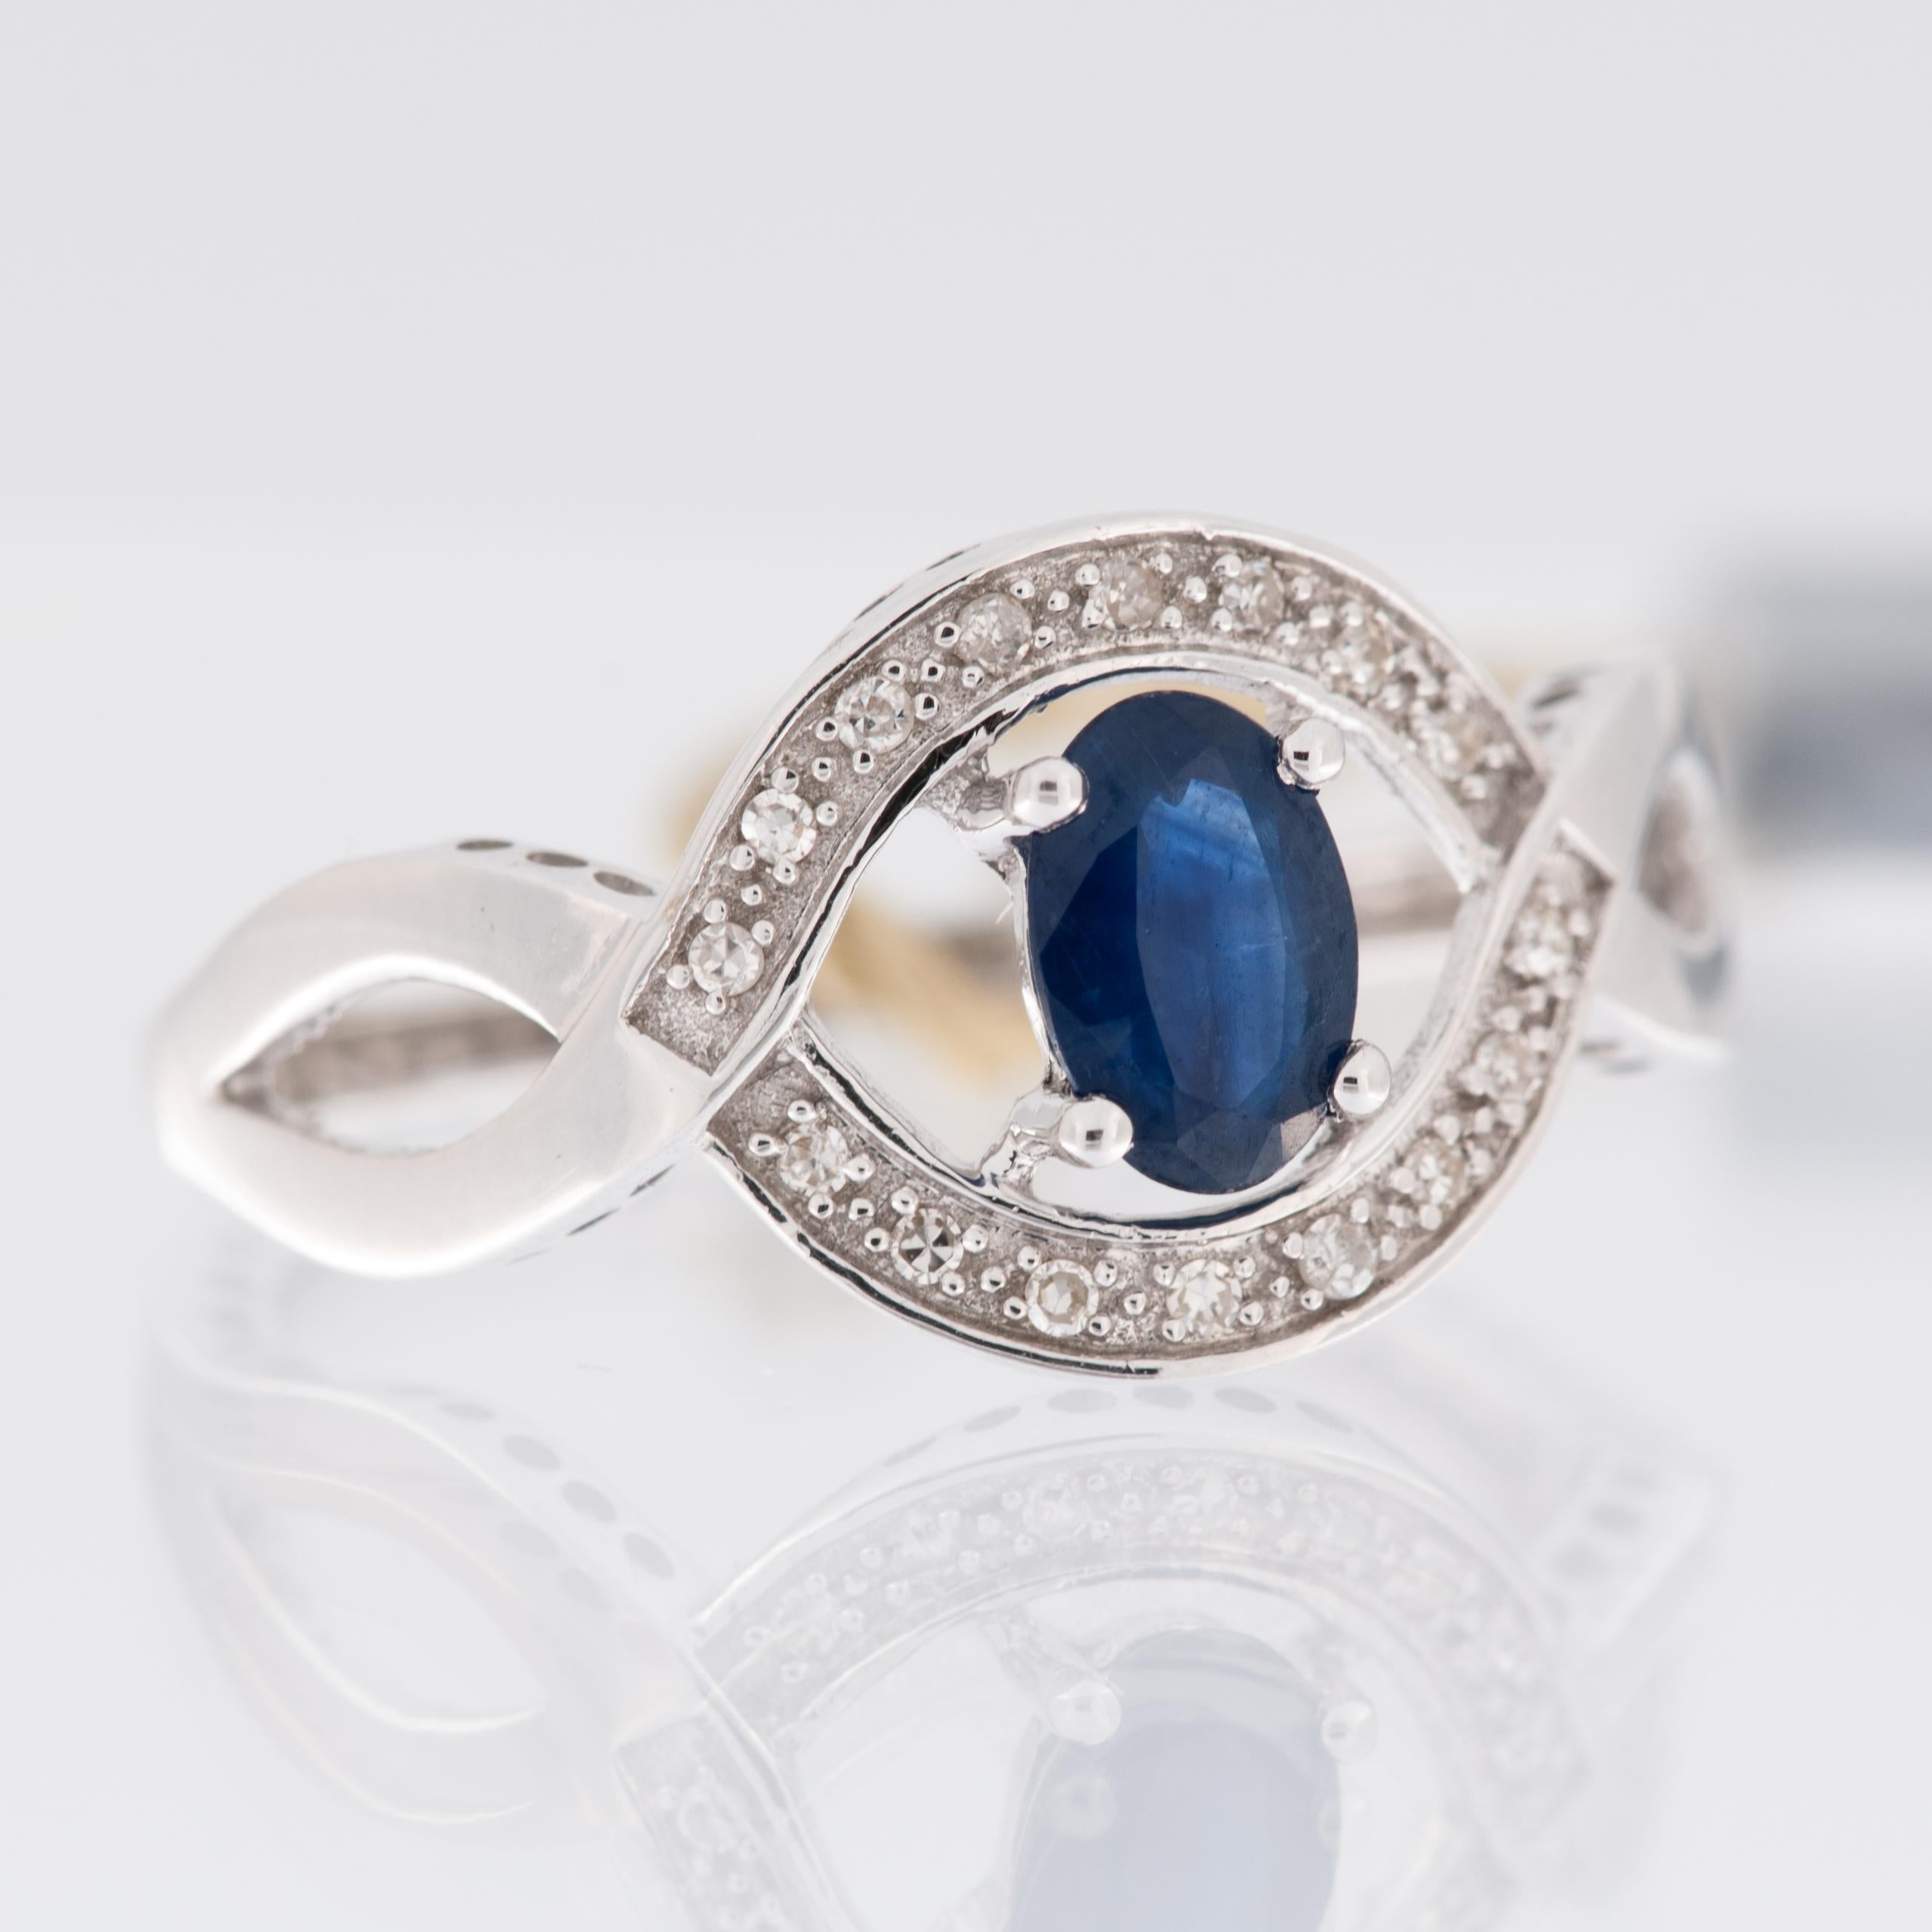 Vintage 9kt White Gold Ring with Diamonds and Sapphire In Good Condition For Sale In Esch sur Alzette, Esch-sur-Alzette